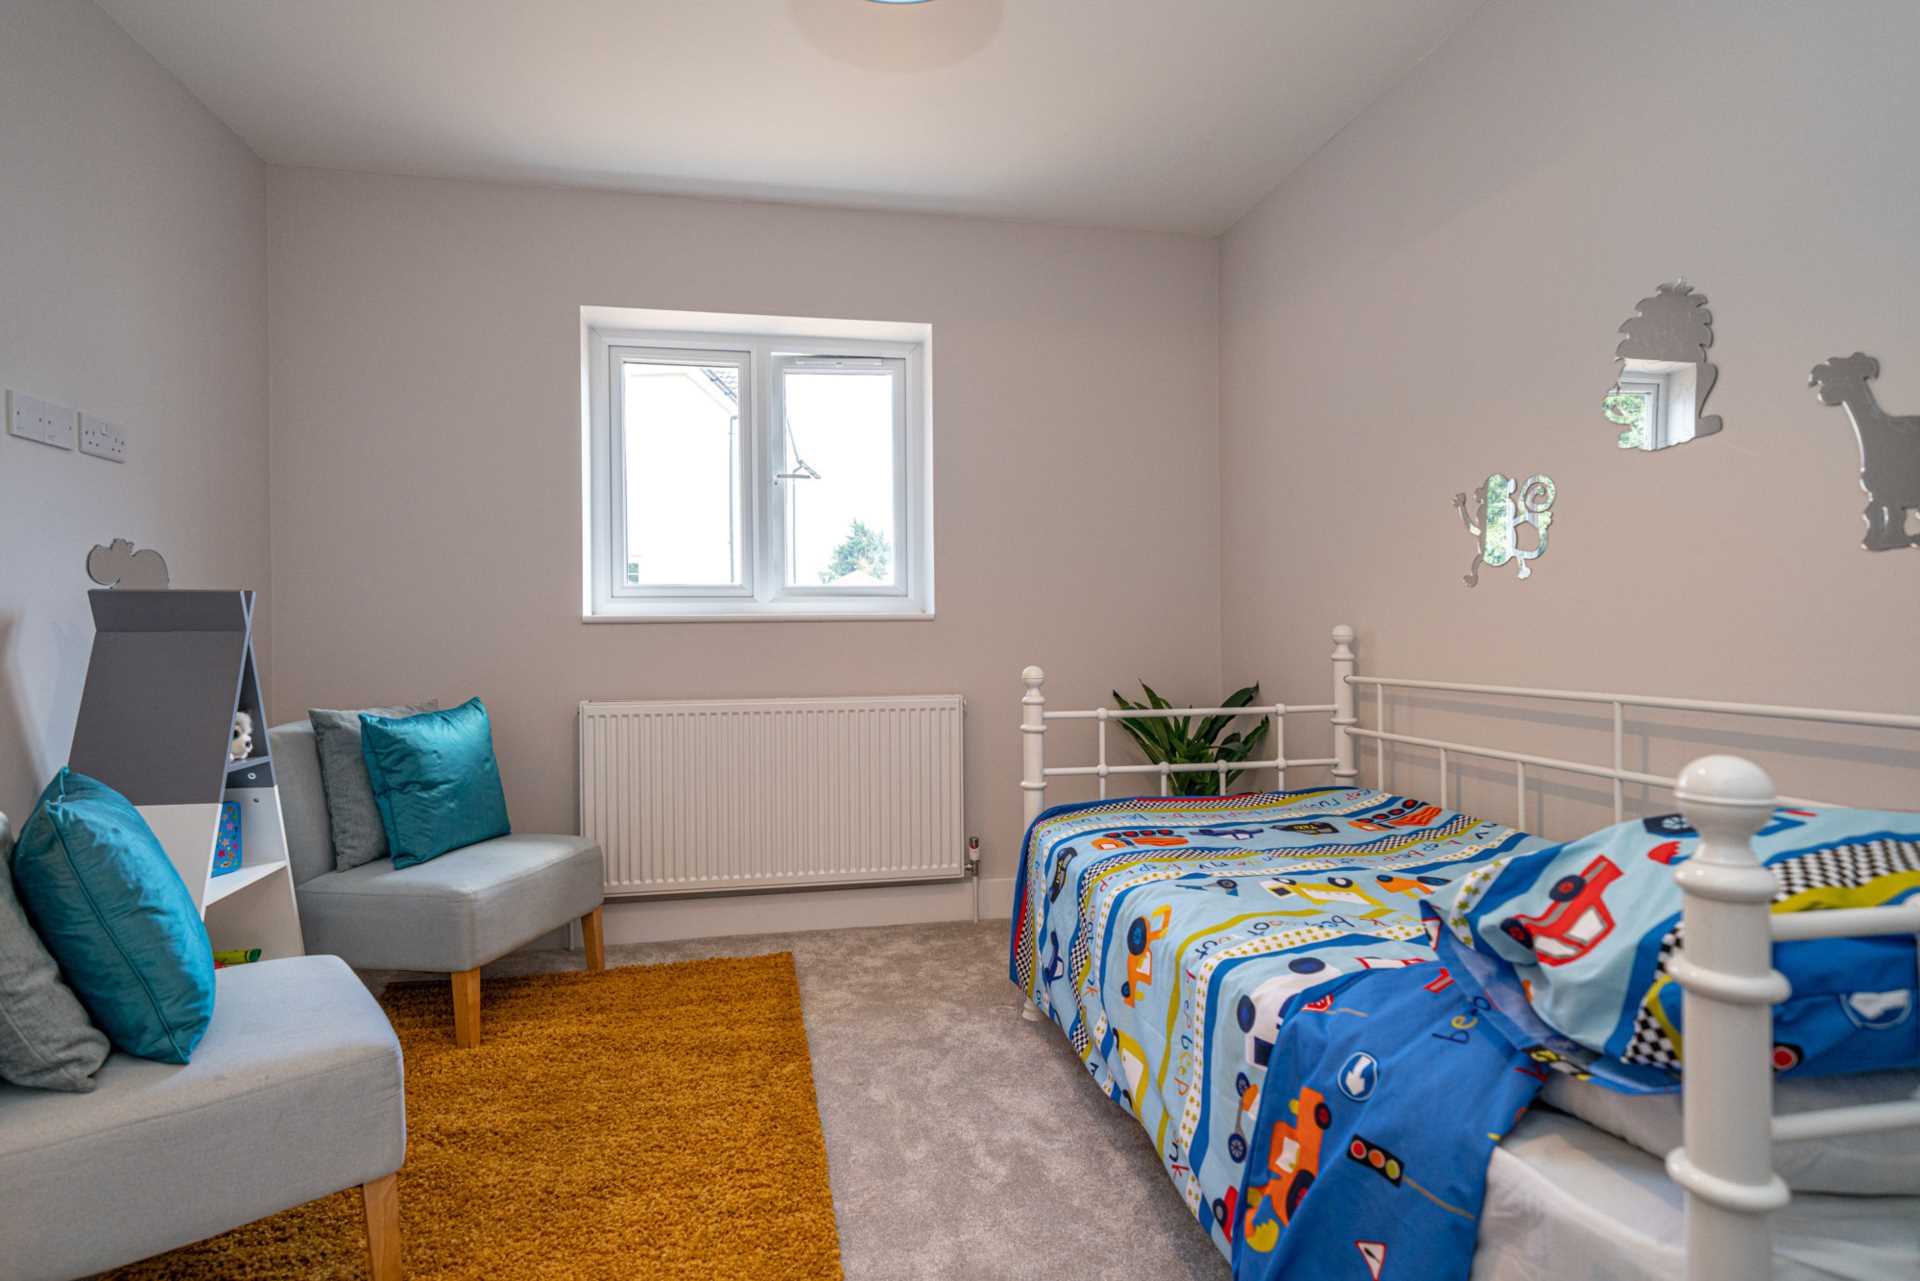 3/4 BED at Savoy Close, Adeyfield, Image 13